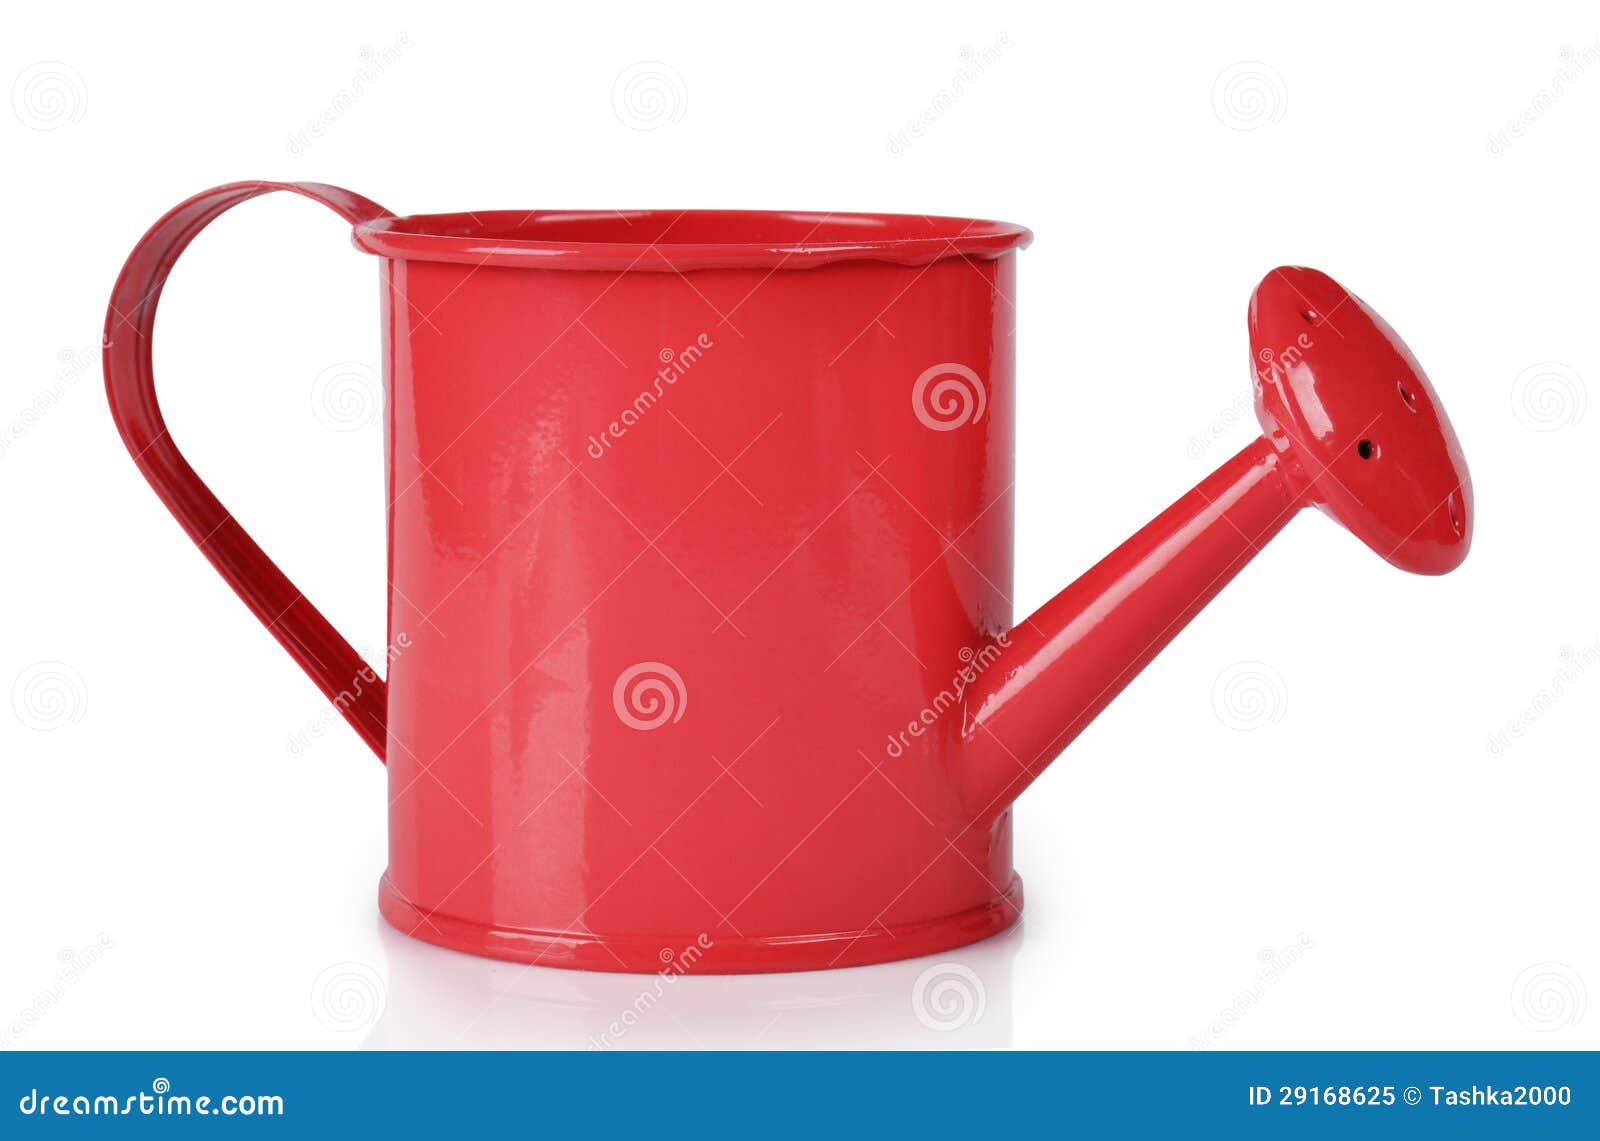 Red watering can stock image. Image of galvanized, horticulture - 29168625